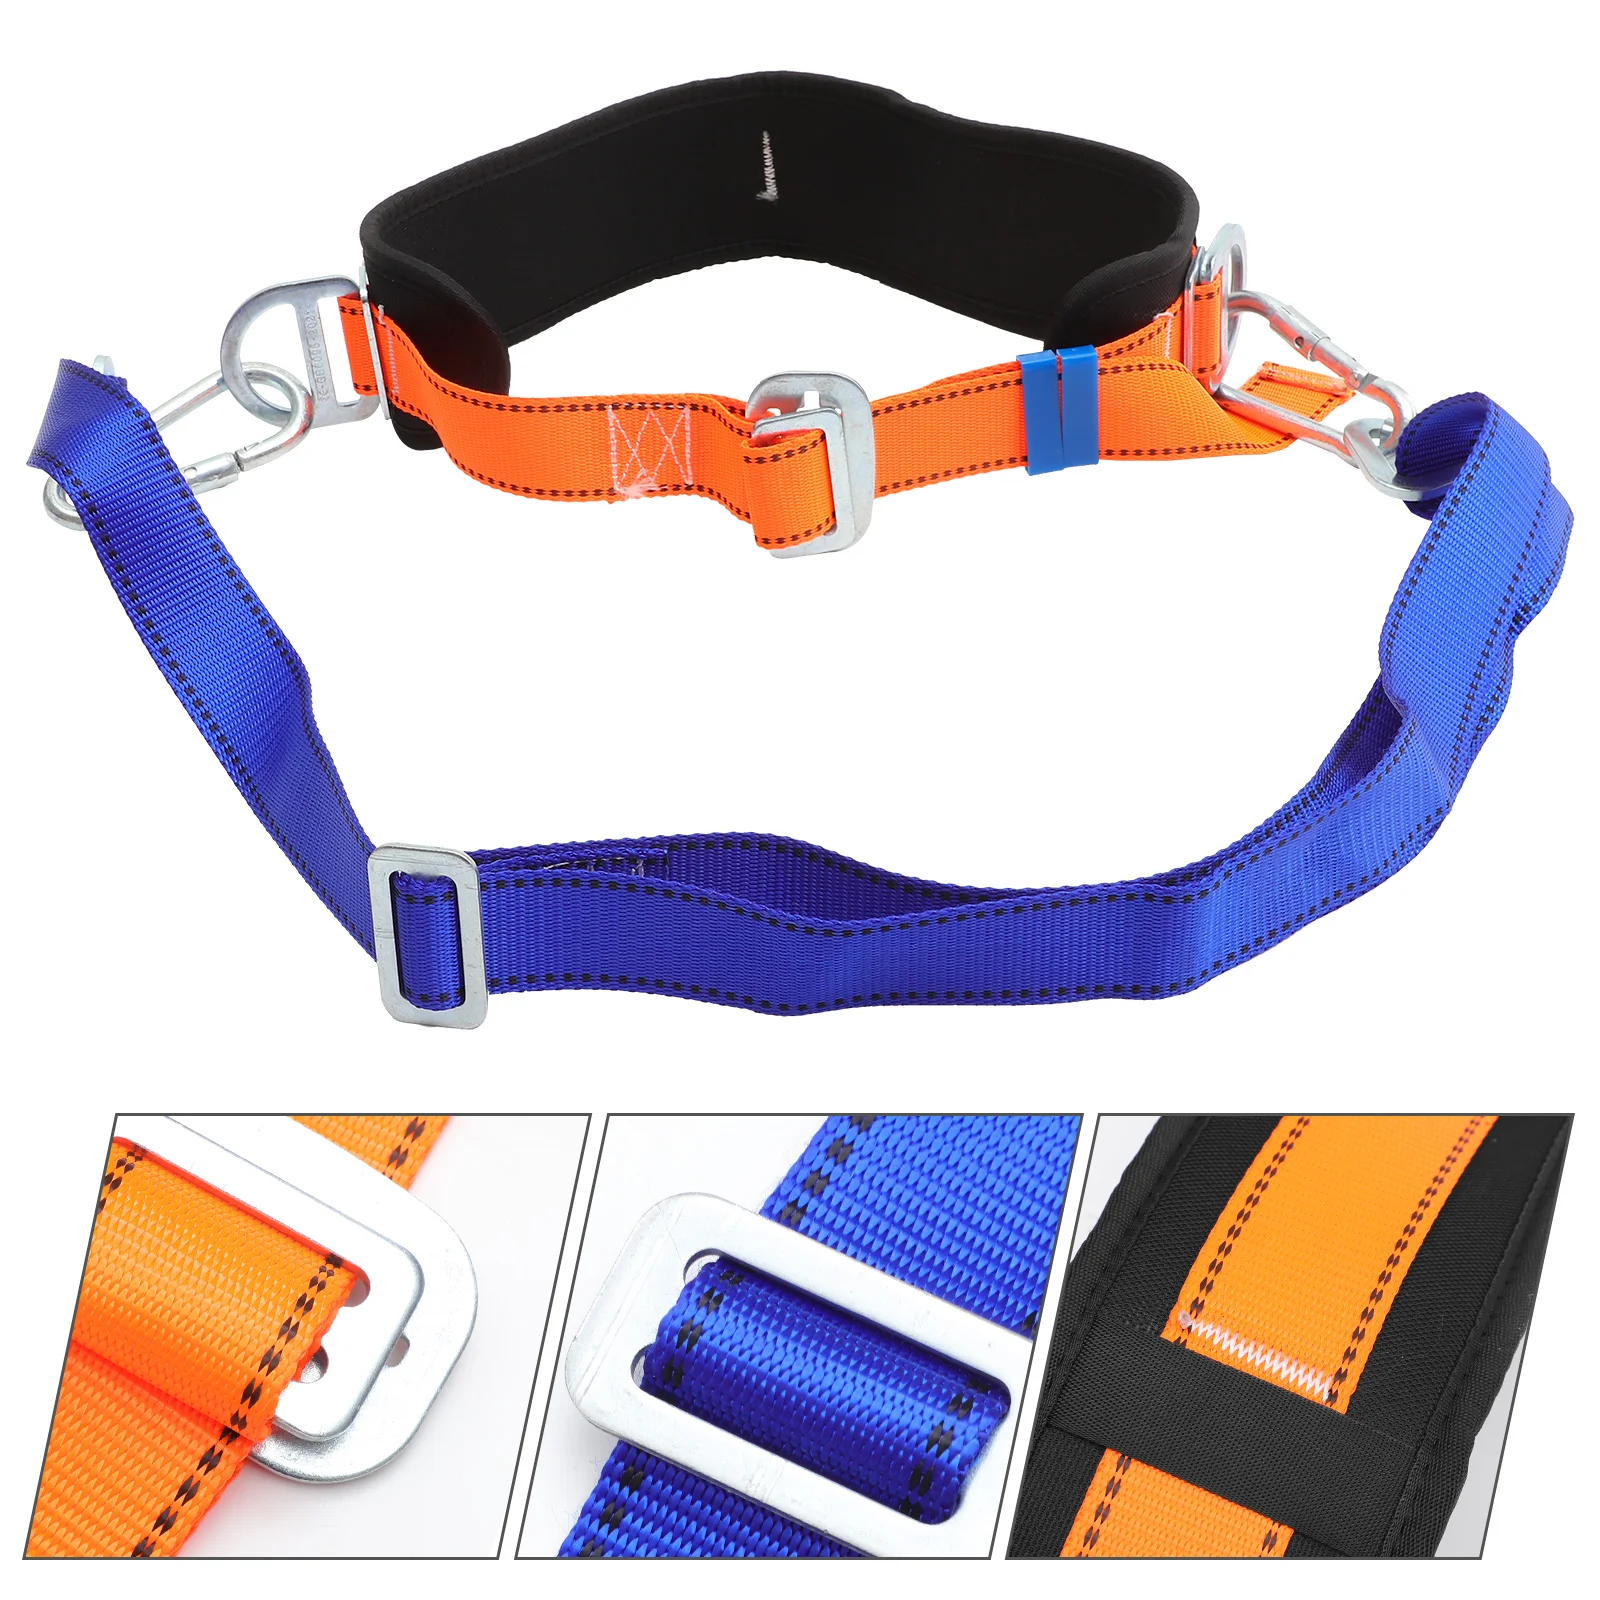 

Safety Belt Durable Portable Practical Anti Falling Safety Belt Safety Belt Electrician Safety Belt For Outdoor Electrician